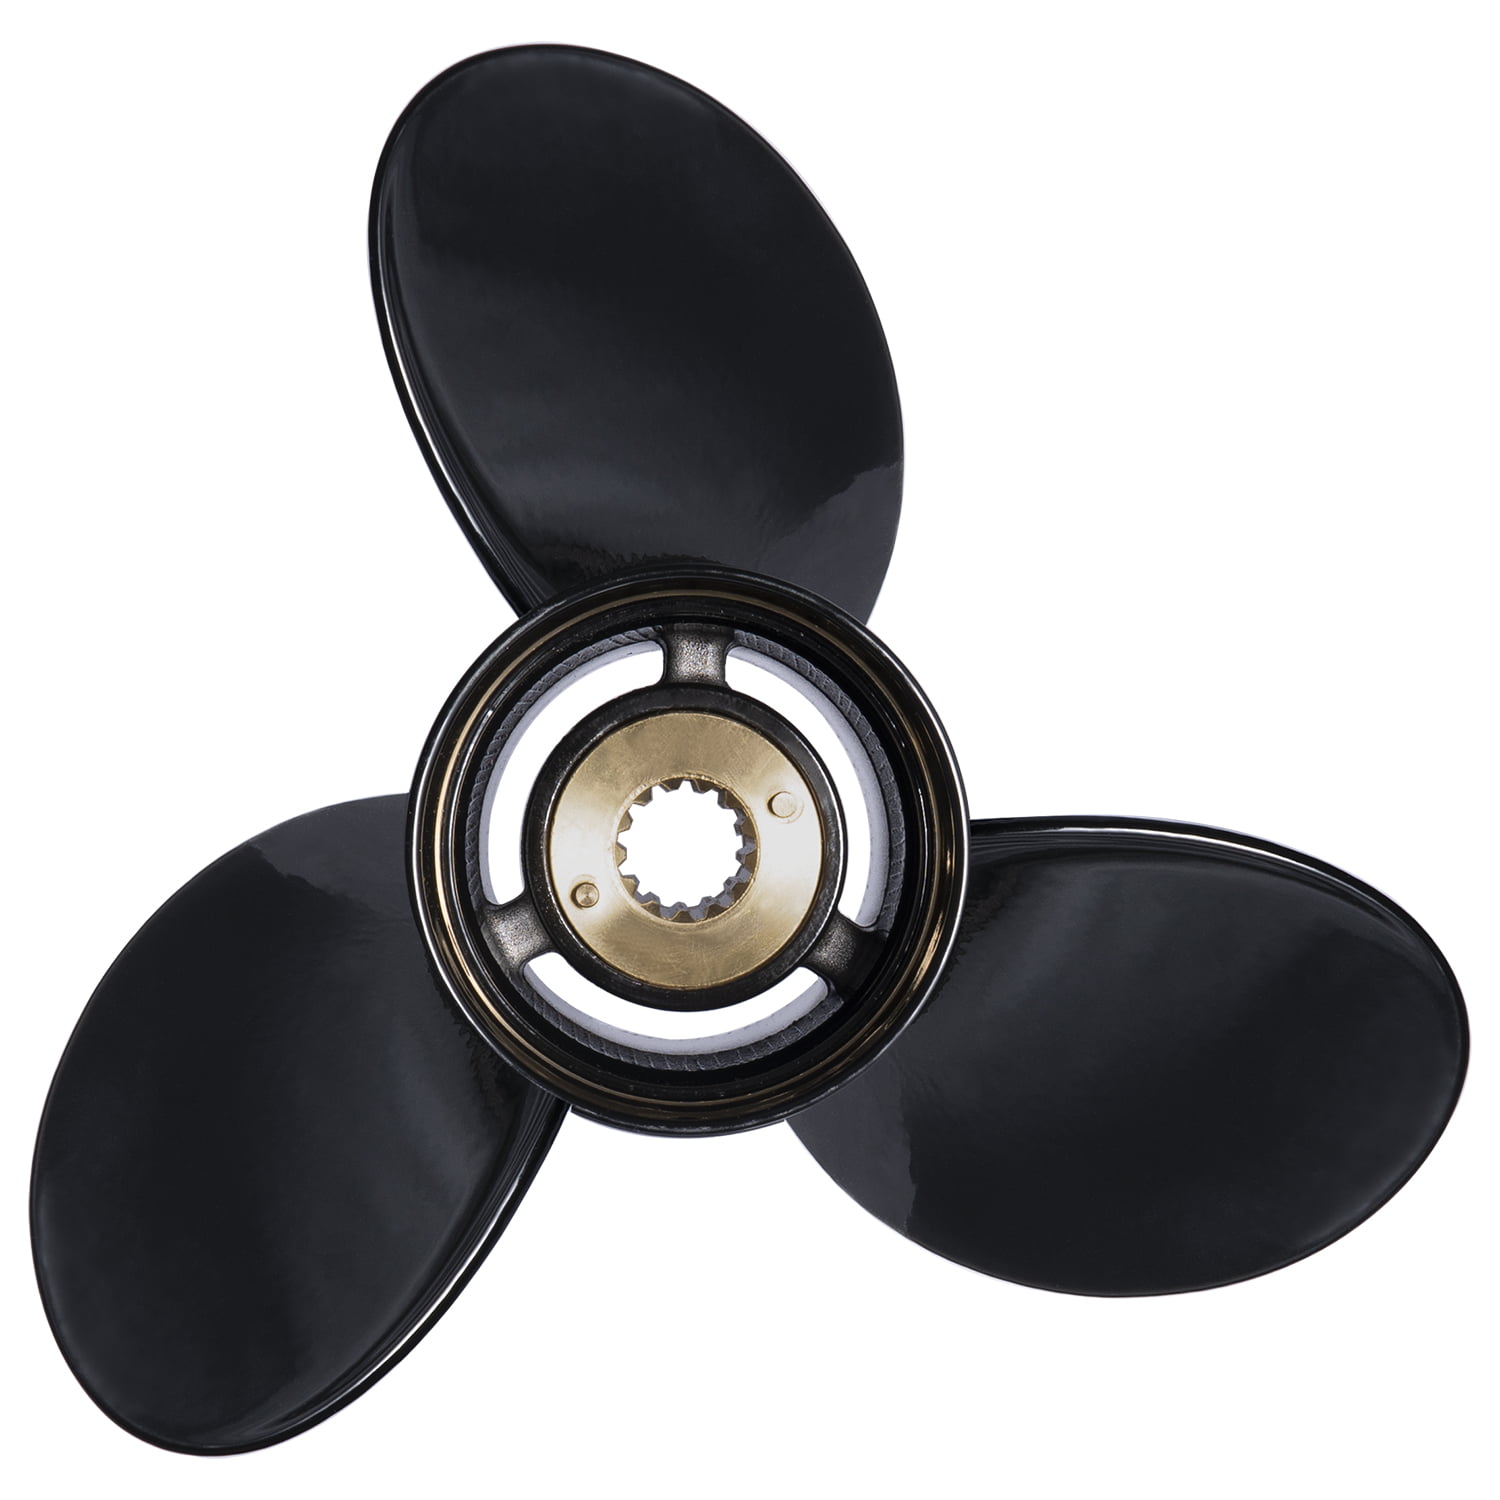 YOUNG MARINE OEM Grade Aluminum Outboard Propeller for Mercury Engines 30/35/40/45/50/55/60/70HP 13 Spline Tooth